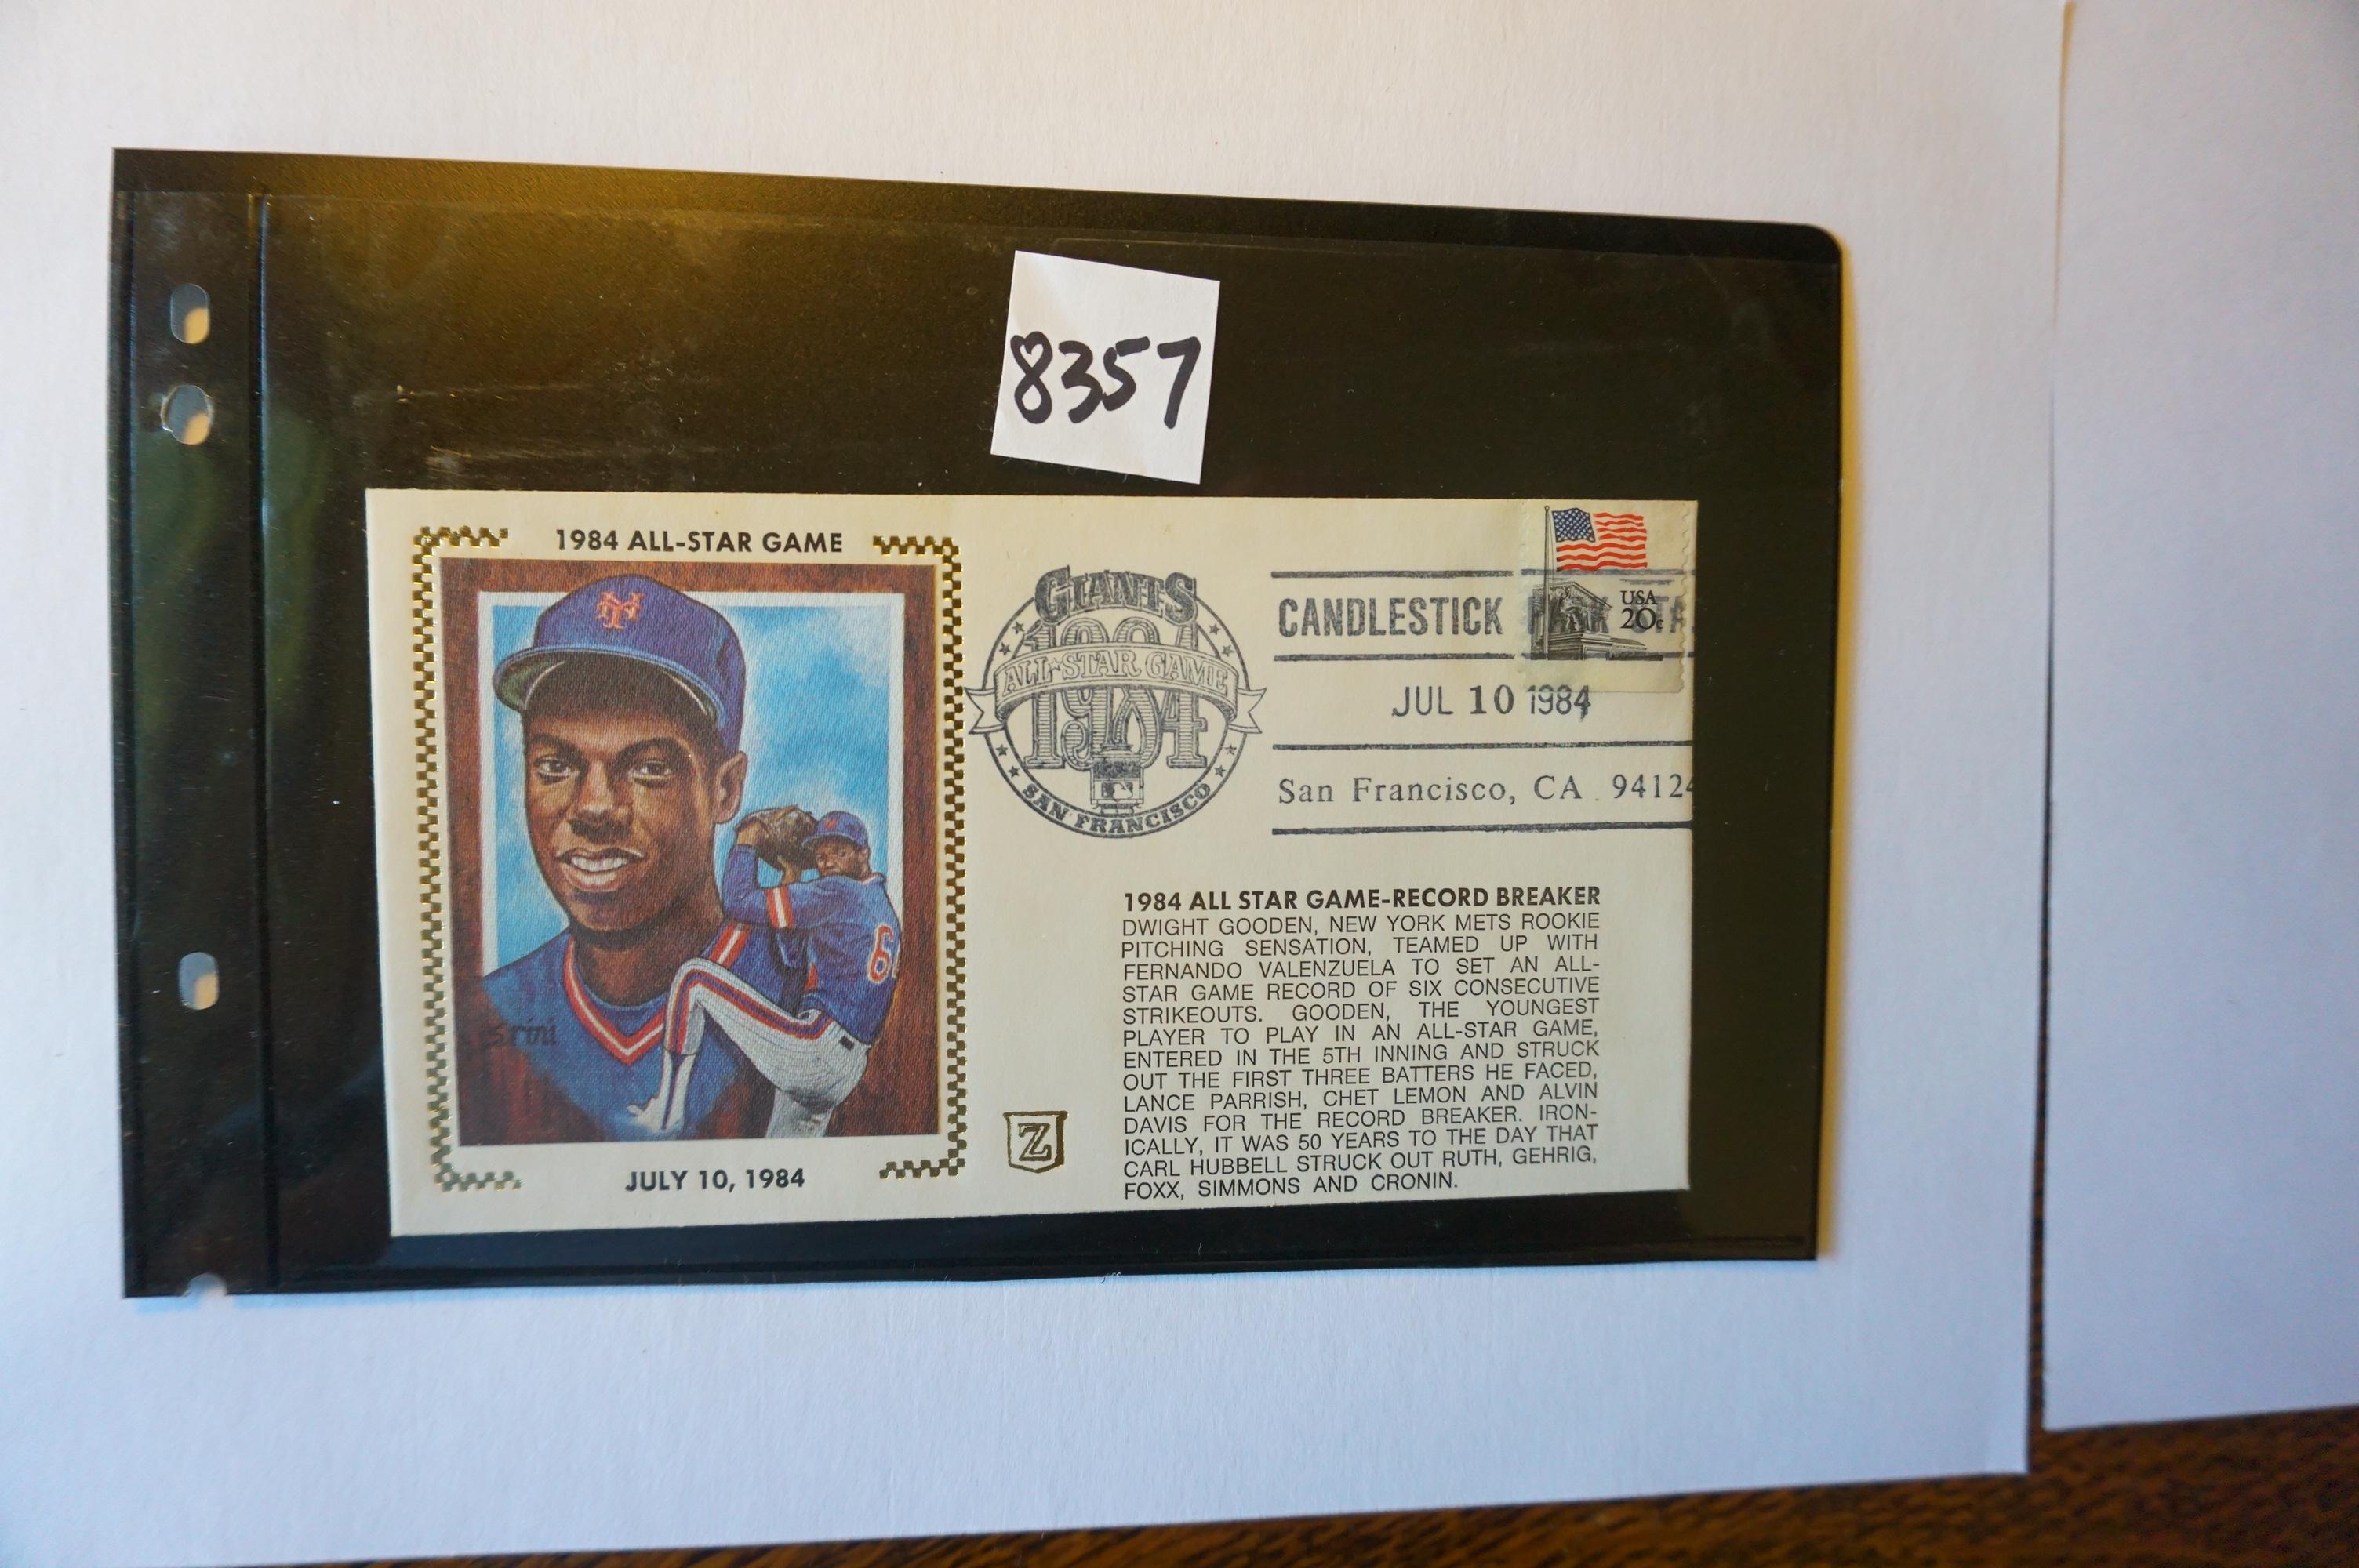 Dwight Gooden 1984 All-Star Game First Day cover July 10th 1984, held at Candlestick Park, SF.